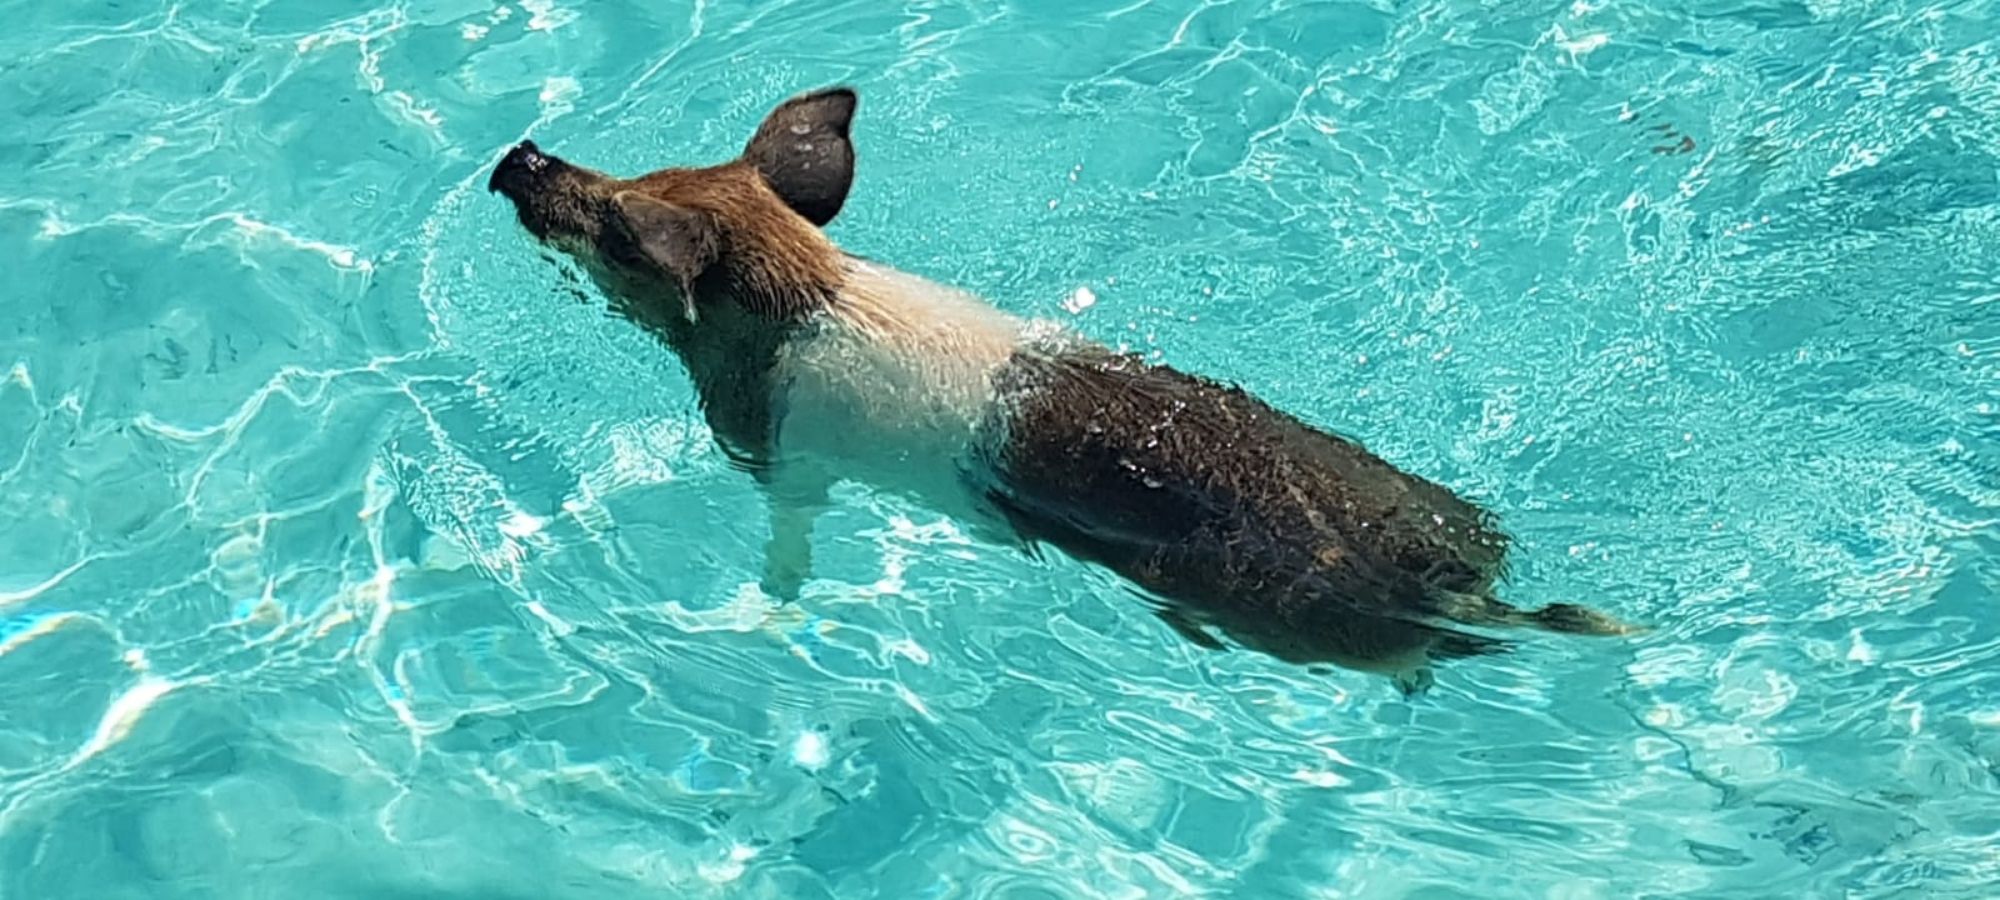 Swimming Pigs Moment